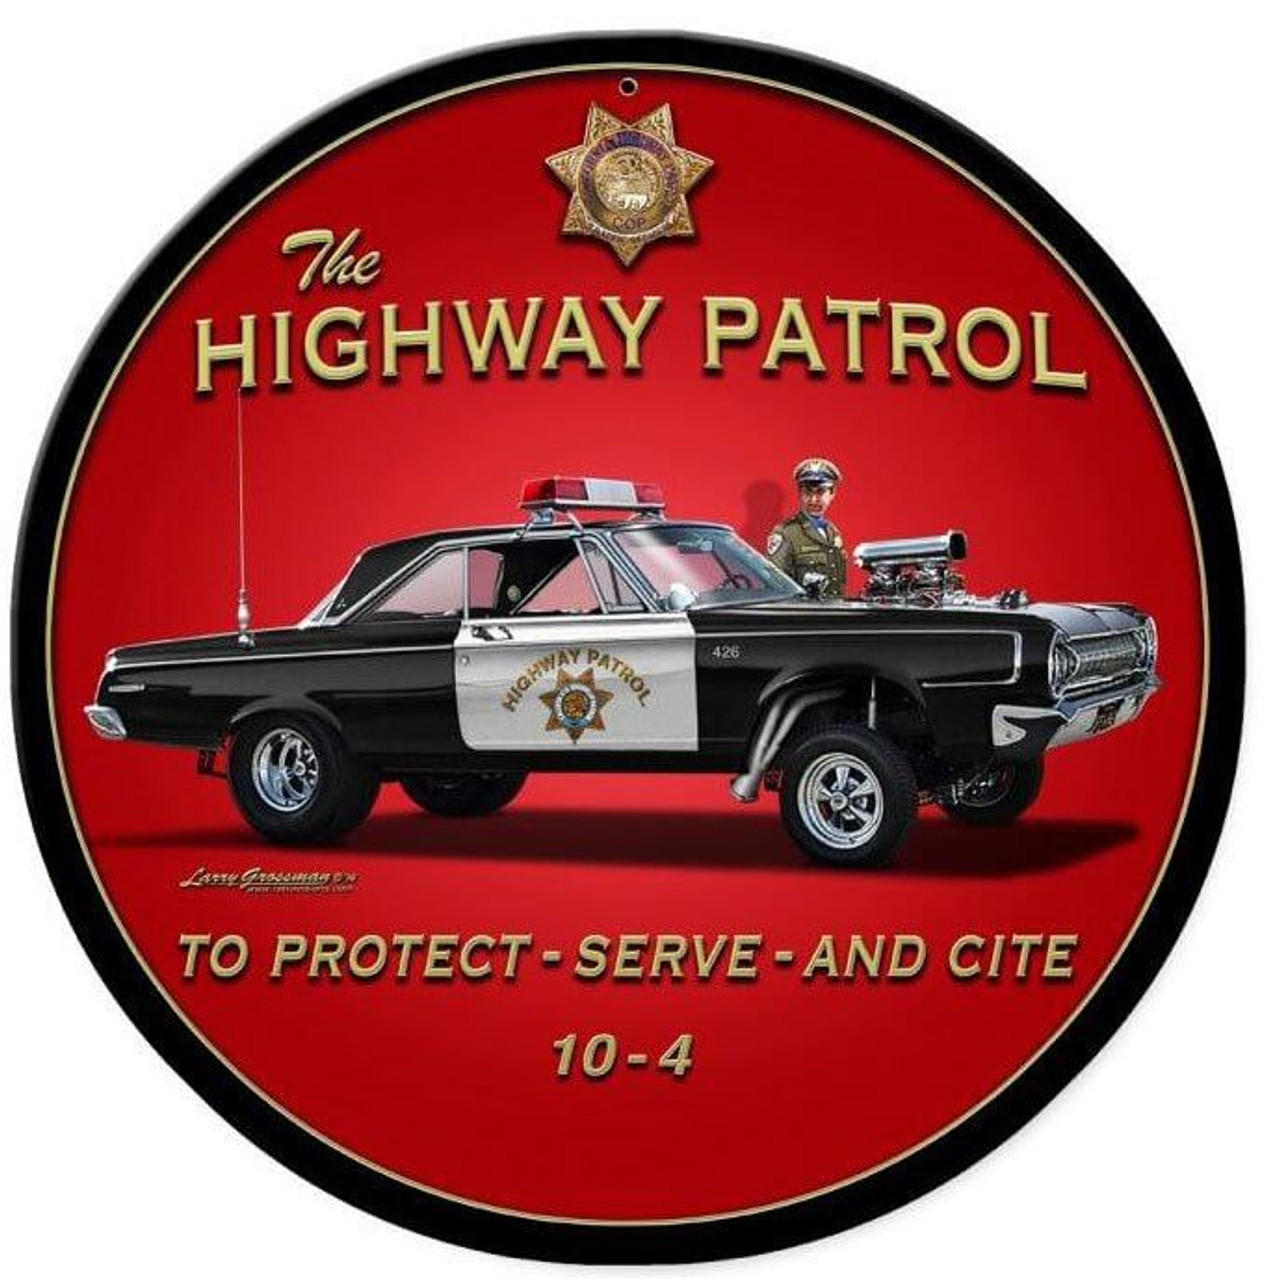 Highway Patrol Round Metal Sign 14 x 14 Inches